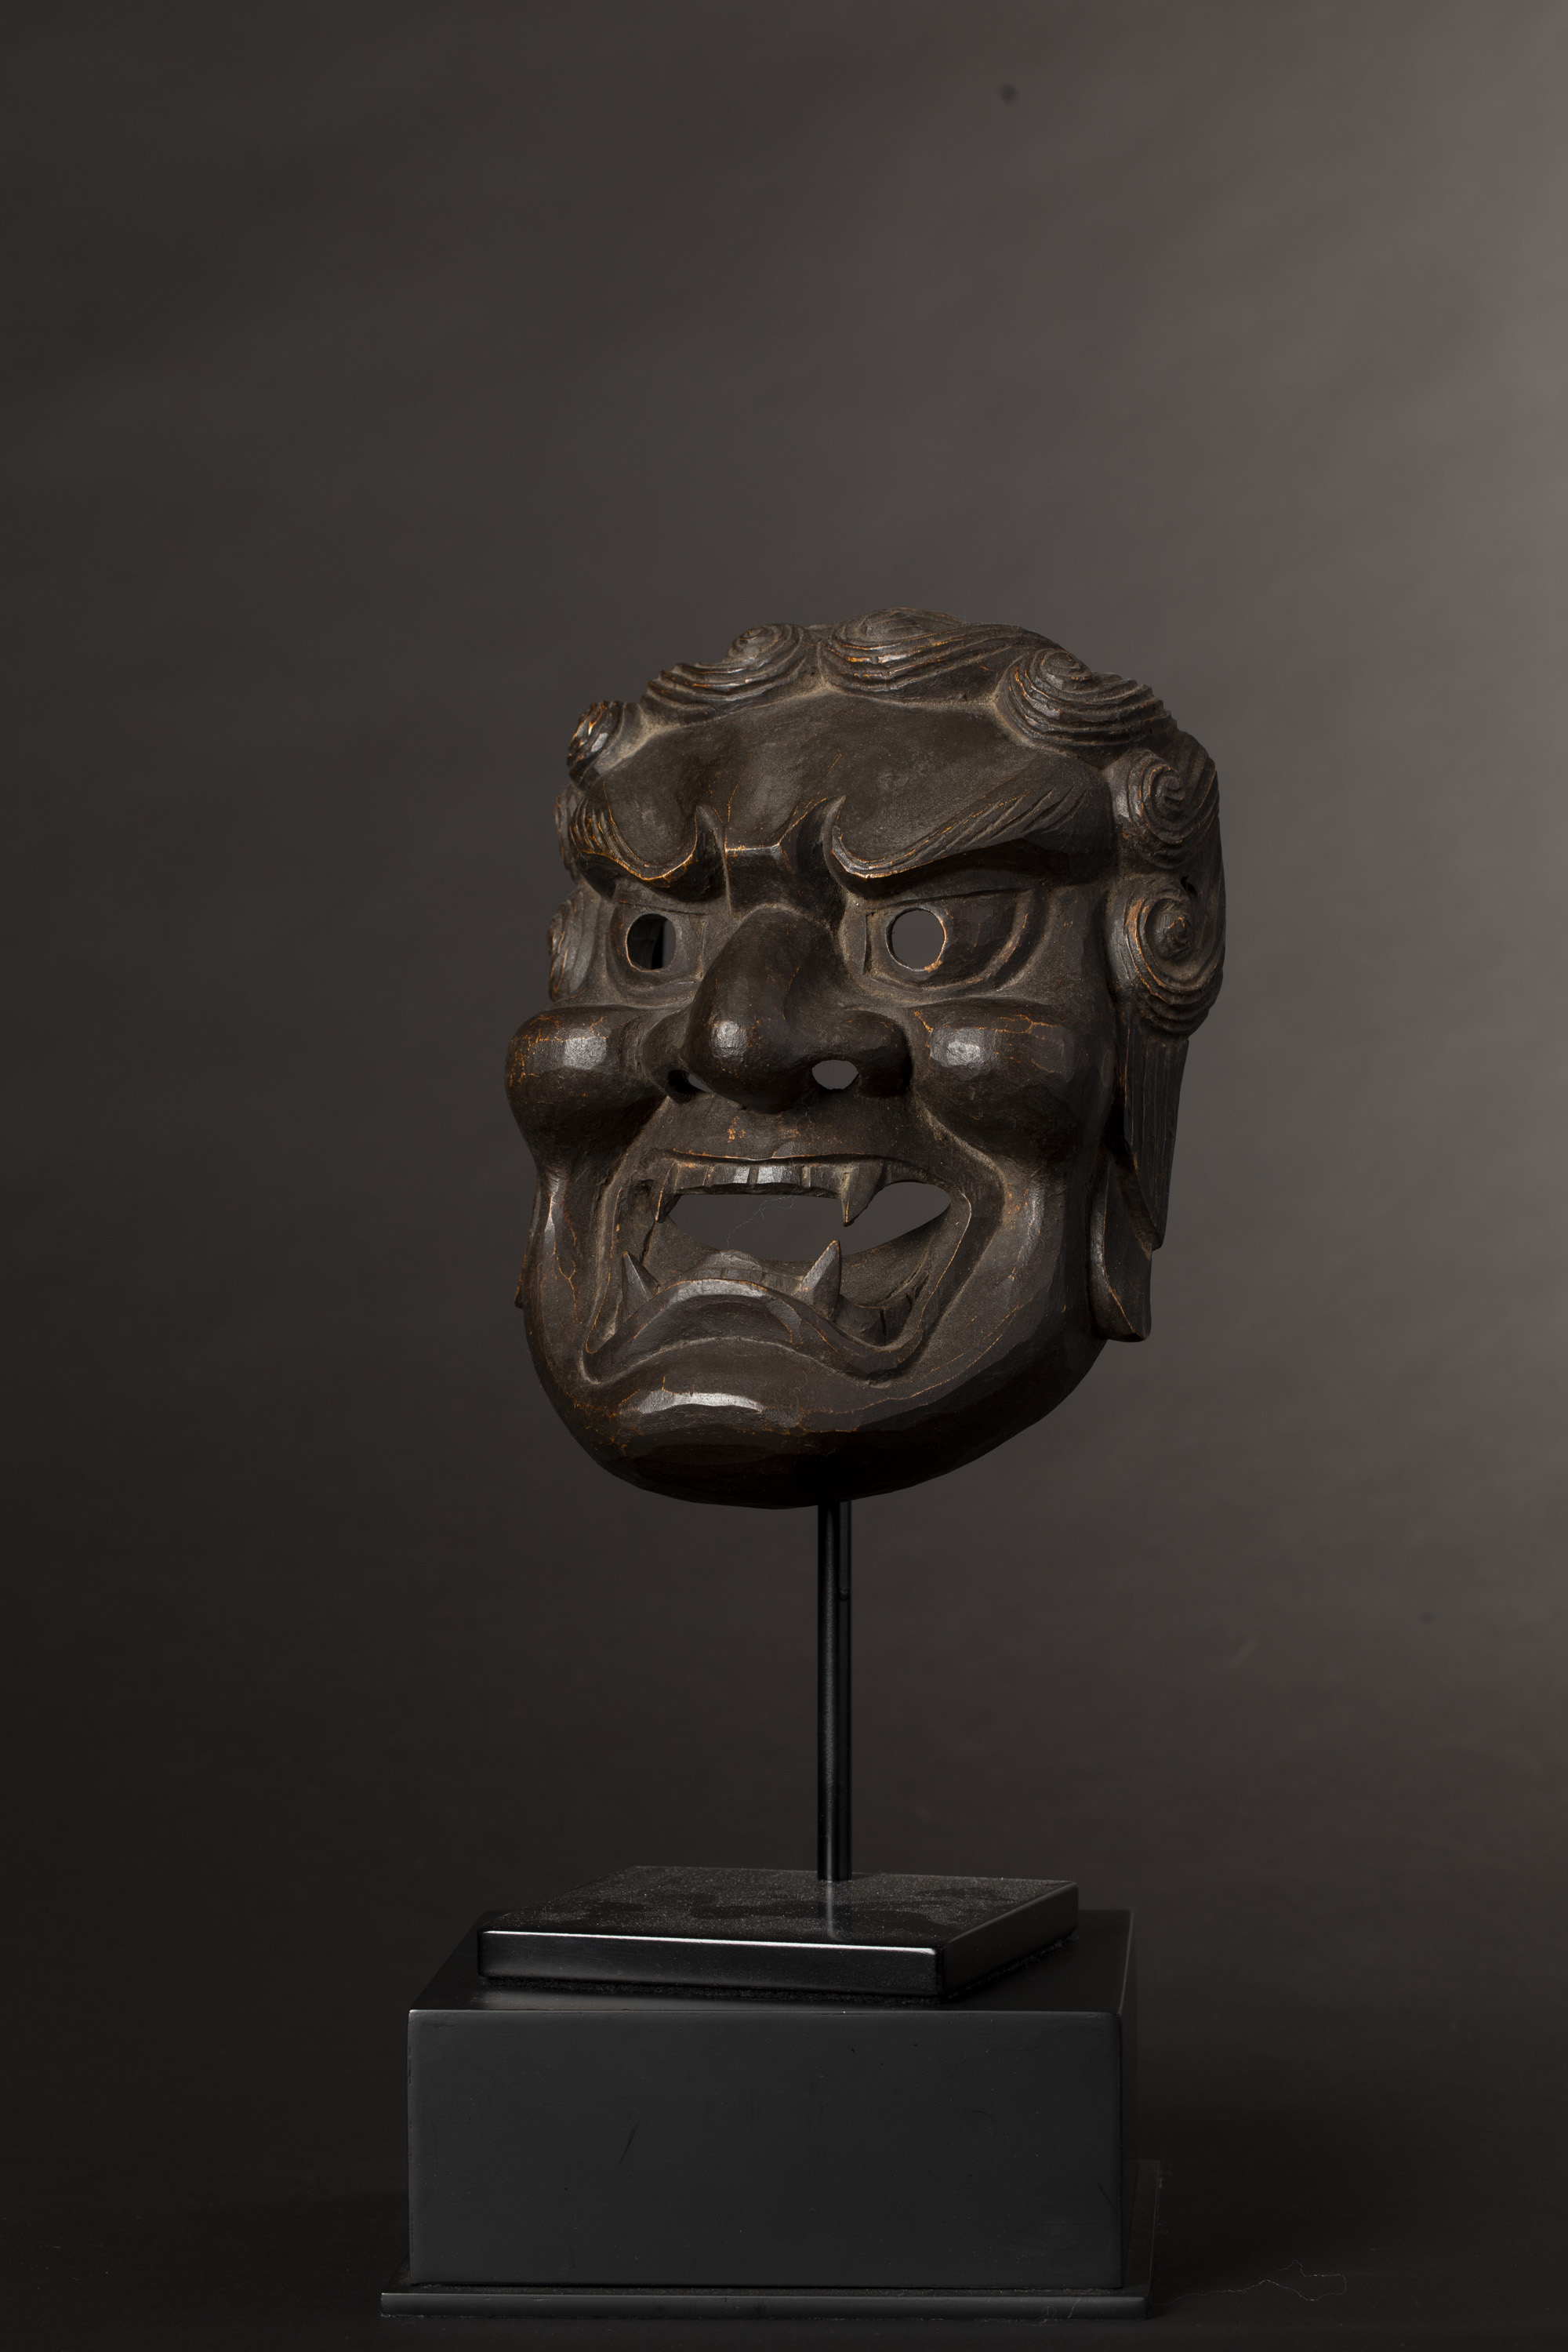 Japanese Hannya Mask use in Noh Theatre Performances